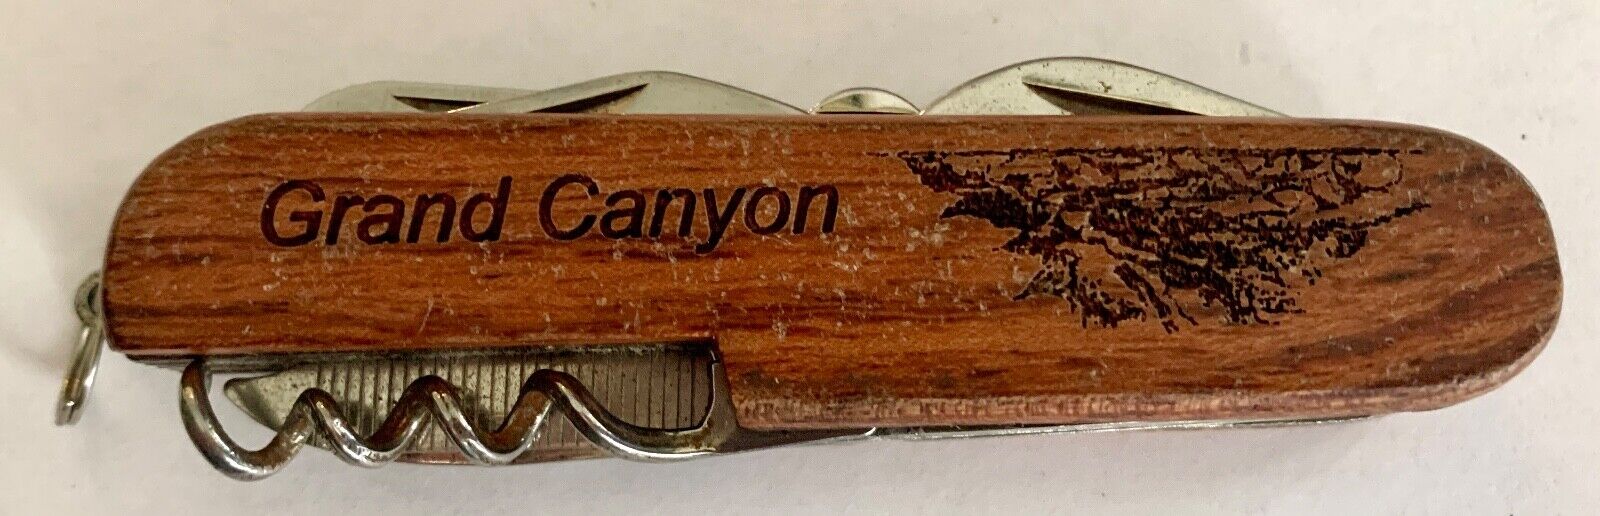 GRAND CANYON POCKET KNIFE WITH 1 BLADE & 8 TOOLS, BROWN WOODEN HANDLE